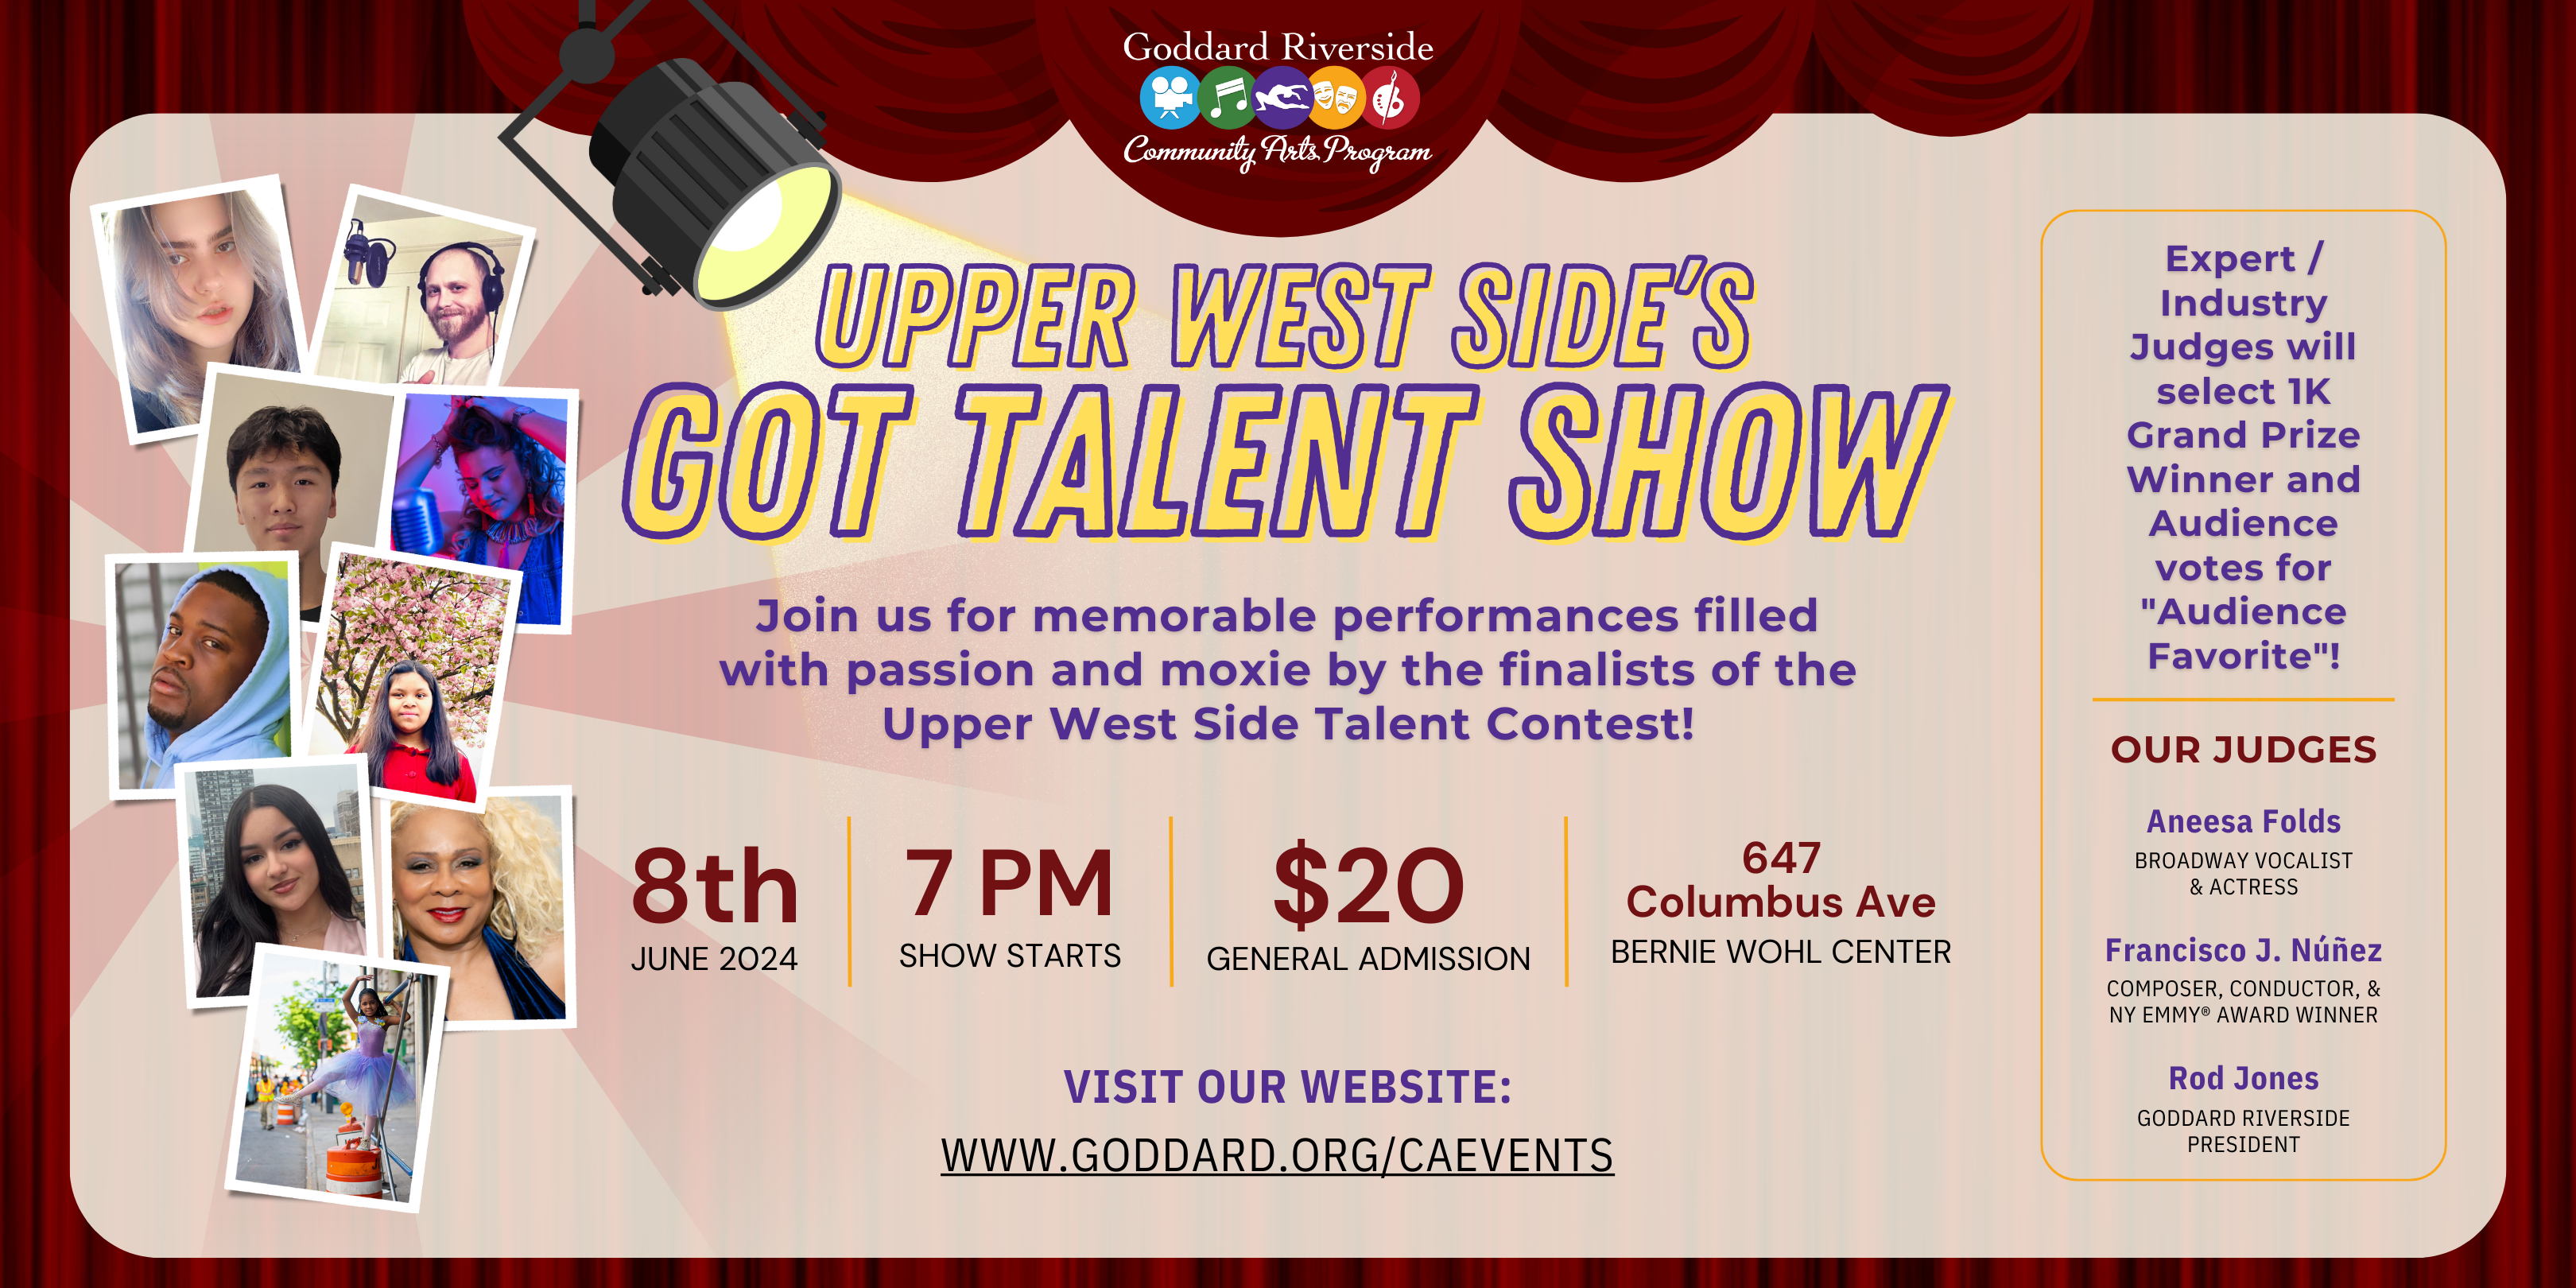 Upper West side’s Got Talent Show. Join us for memorable performances filled with passion and moxie by the finalists of the Upper West Side Talent Contest! June 8th at 7pm. Tickets for $20.